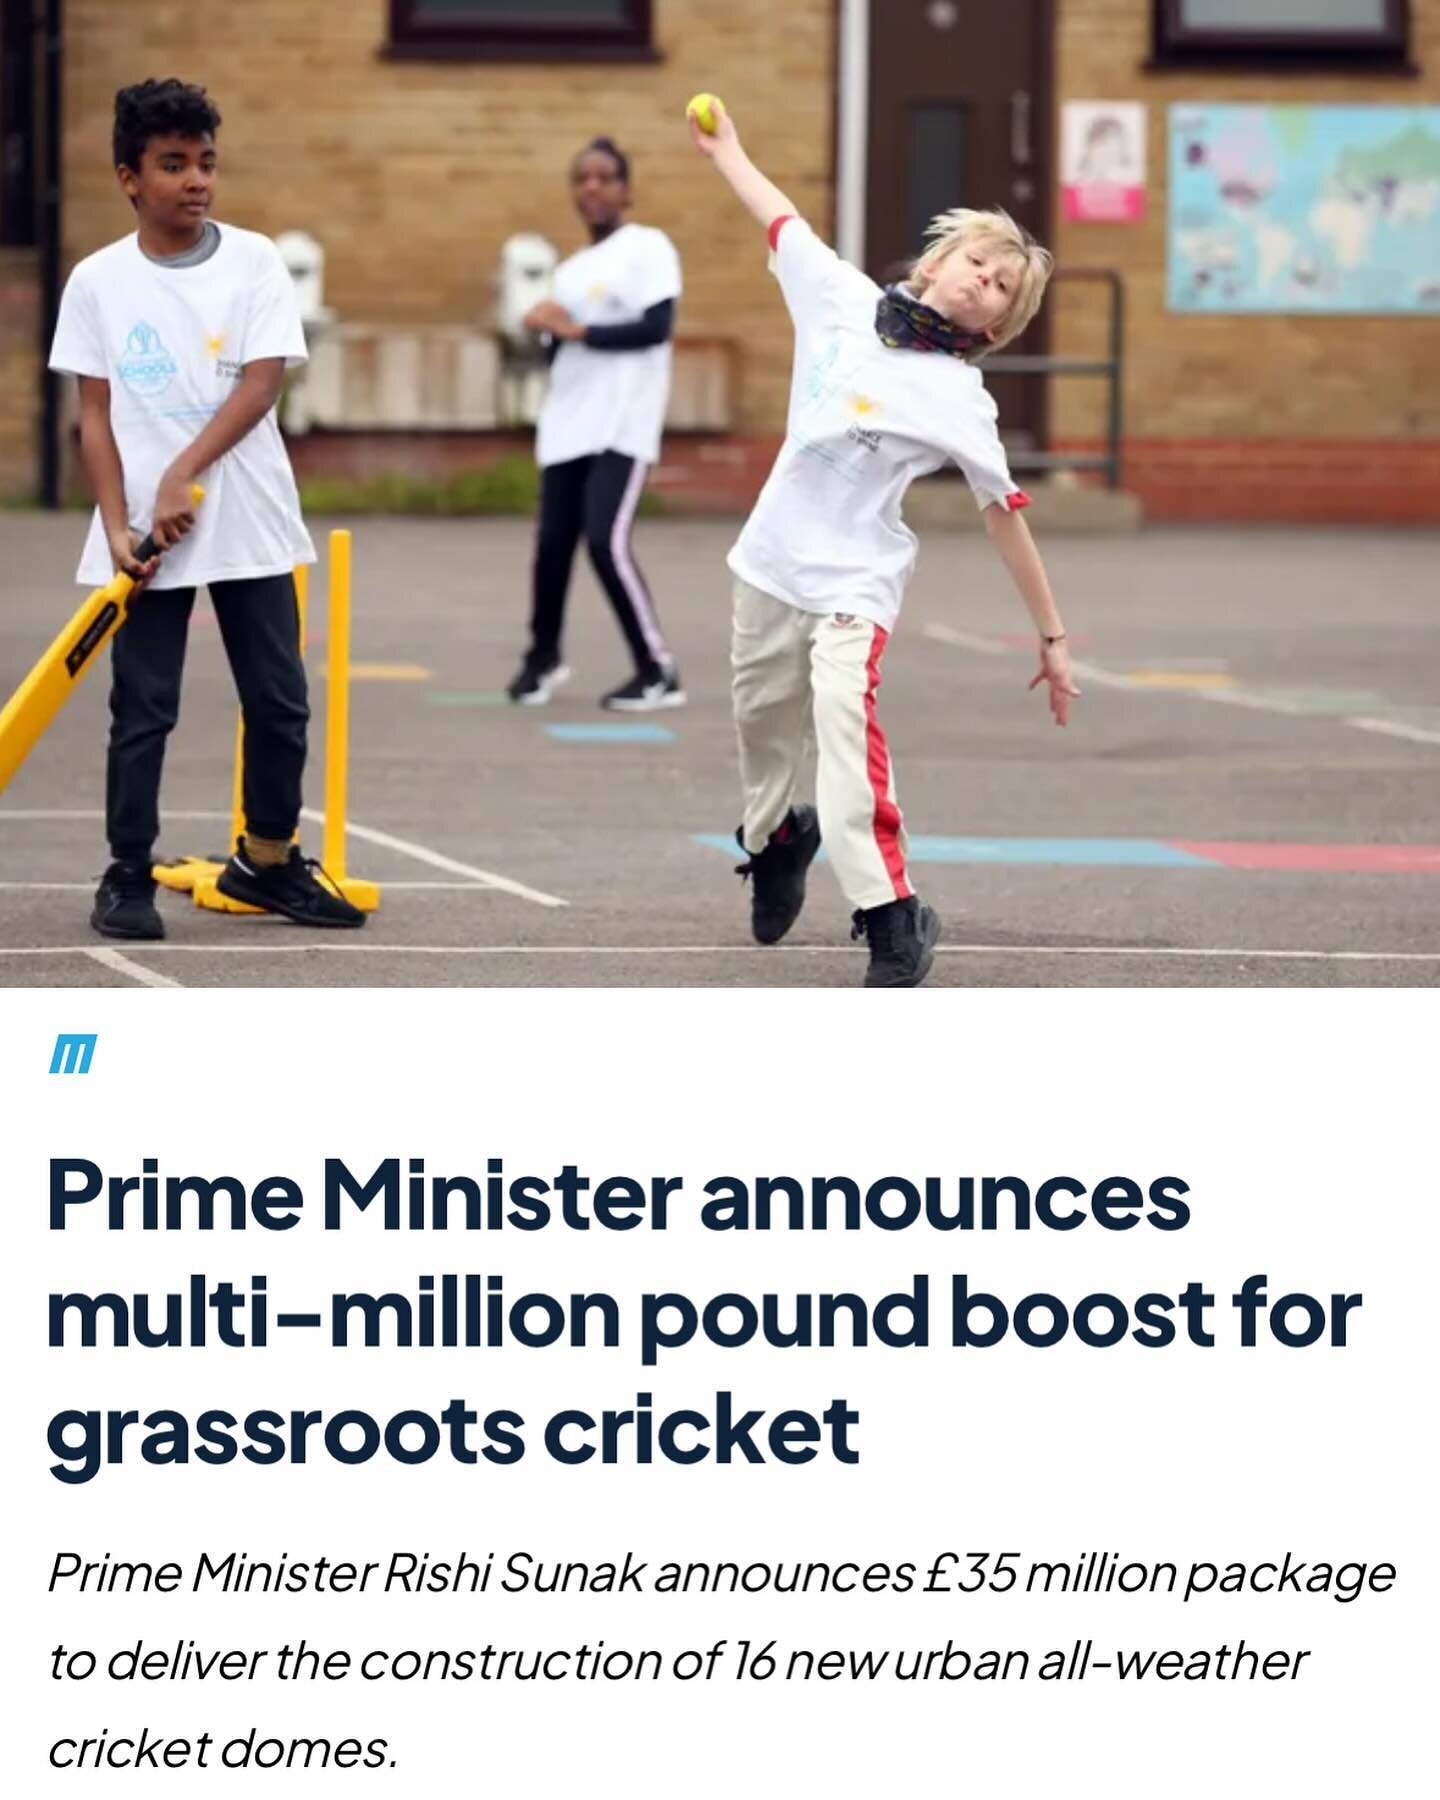 This is fantastic news for the game of cricket! Great to see a @stokeycricket junior represented here. Kids like this need opportunities to play cricket in inner-city Britain. SNCC is the largest cricket club in East London and summer training starts